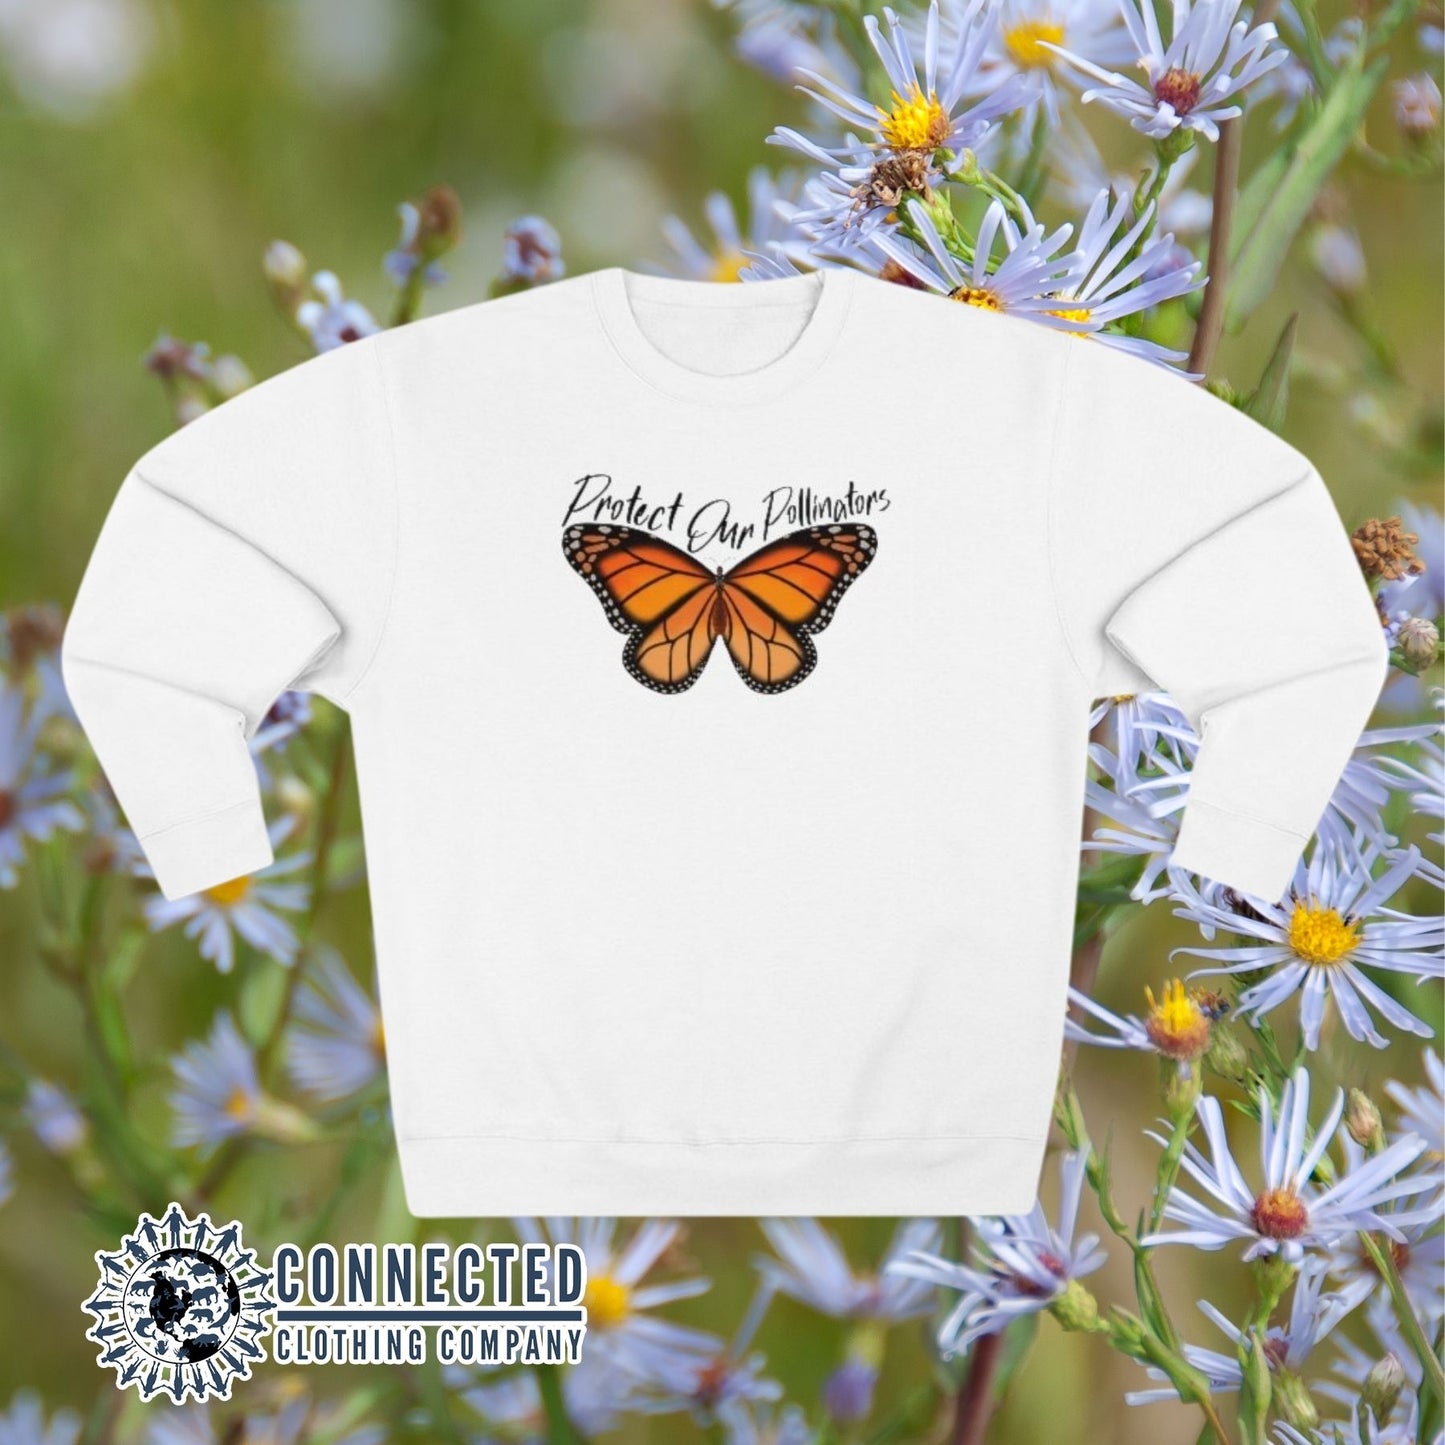 White Protect Our Pollinators Crewneck Sweatshirt - Connected Clothing Company - Ethically and Sustainably Made - 10% of profits donated to pollinator and monarch conservation and ocean conservation